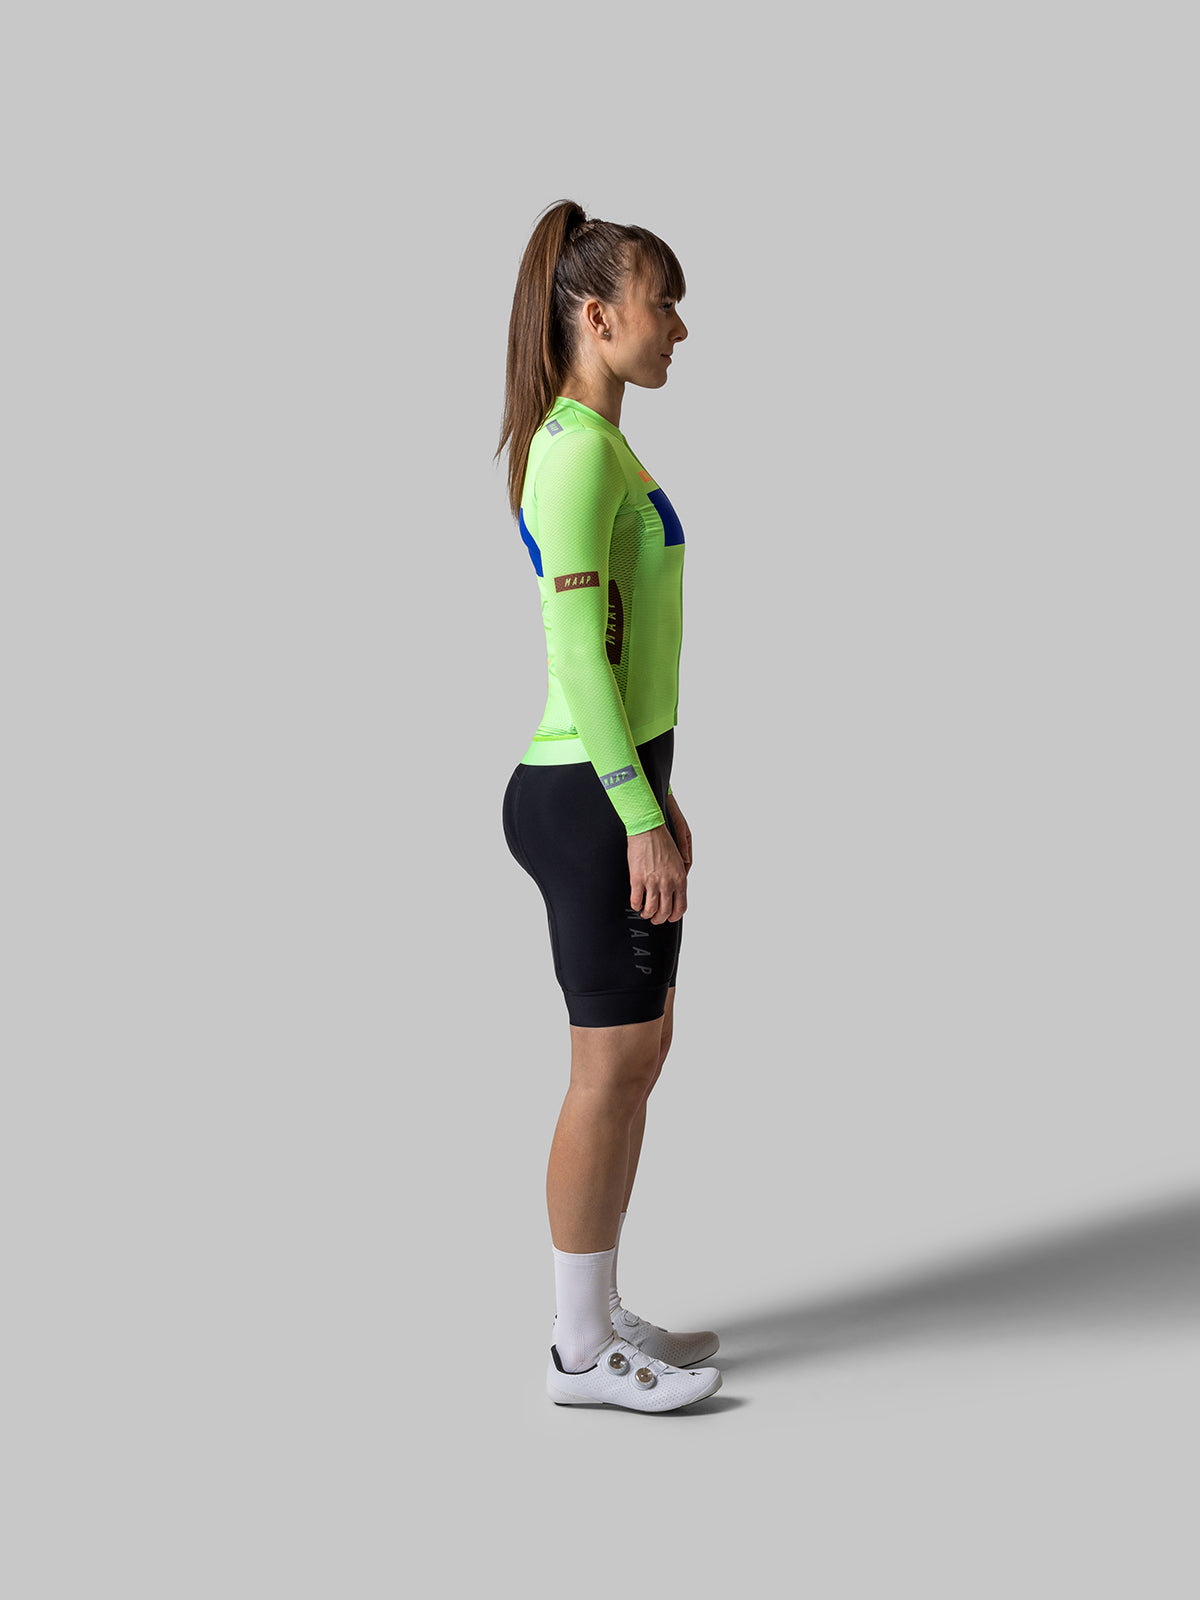 Women's System Pro Air LS Jersey